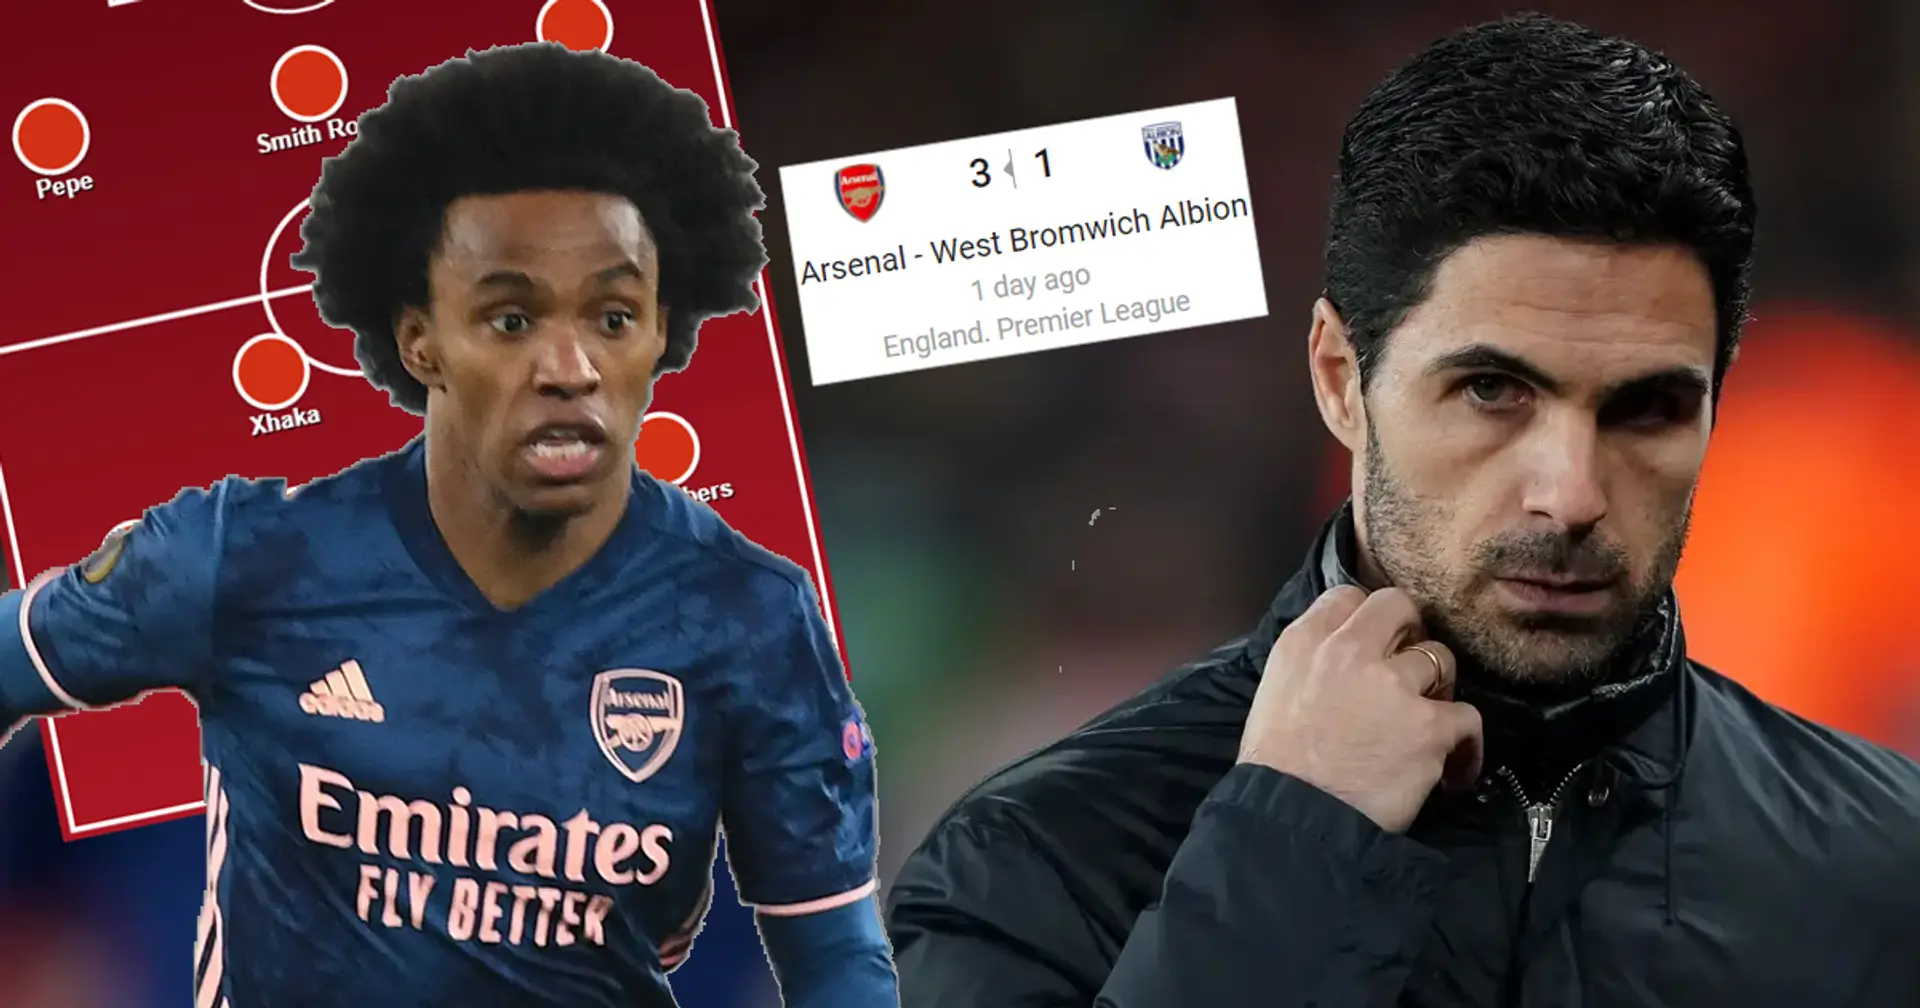 Willian out: How Arsenal could line up against Chelsea based on West Brom game